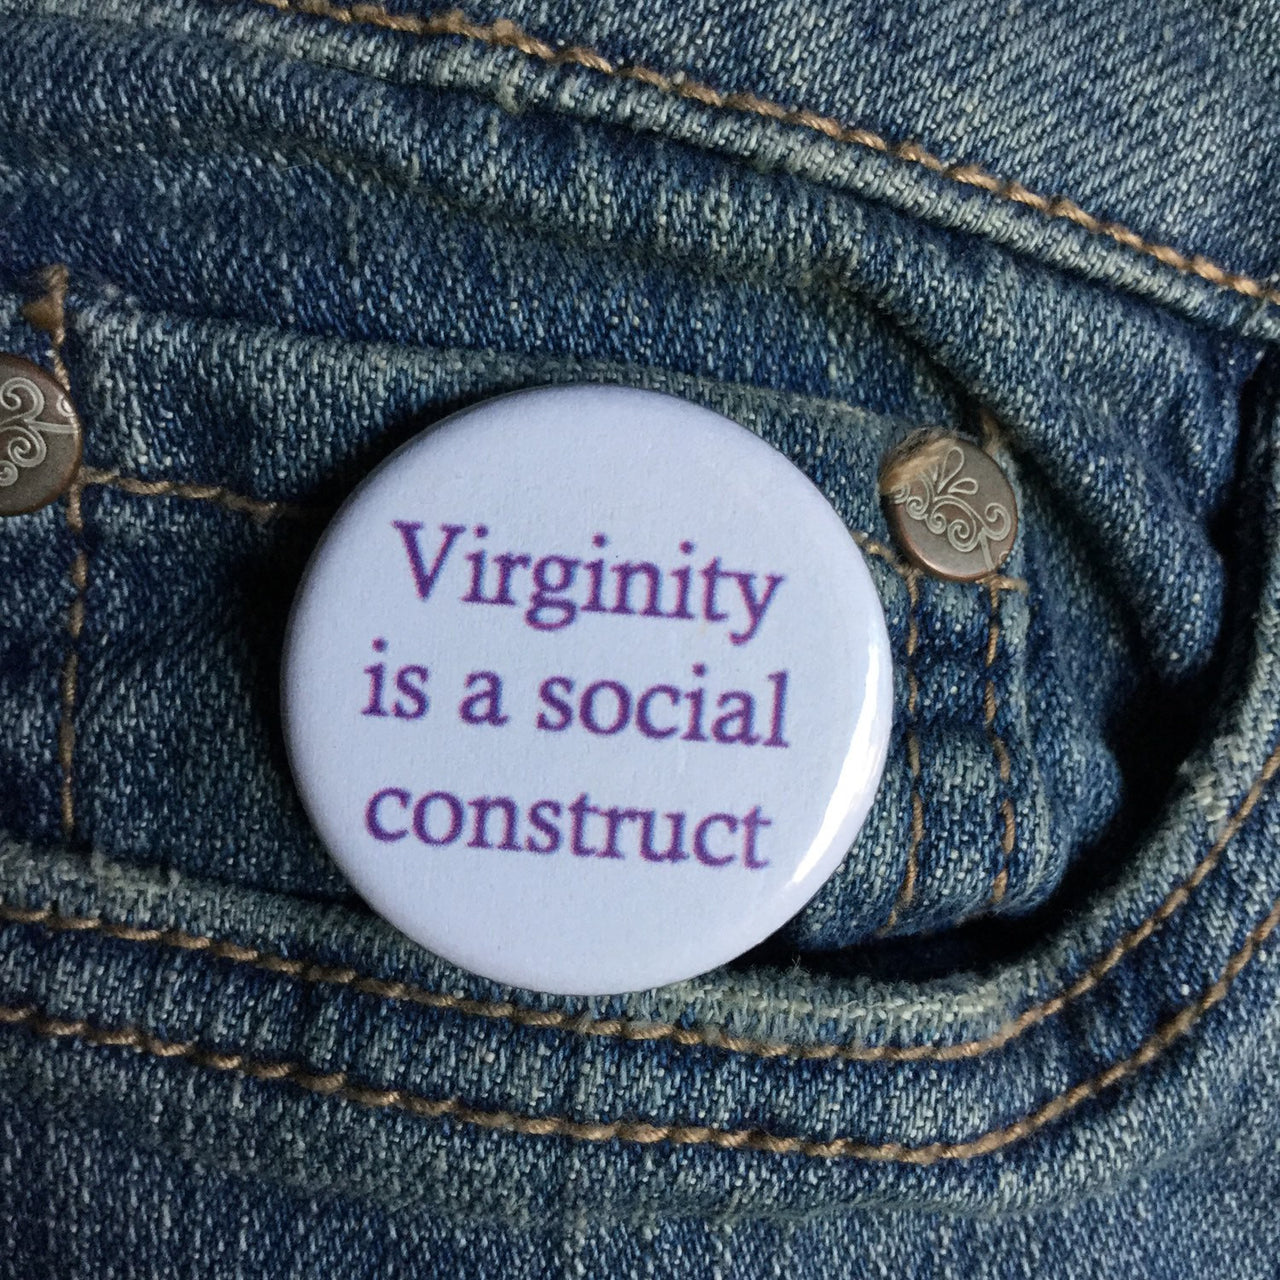 Virginity is a social construct - Radical Buttons